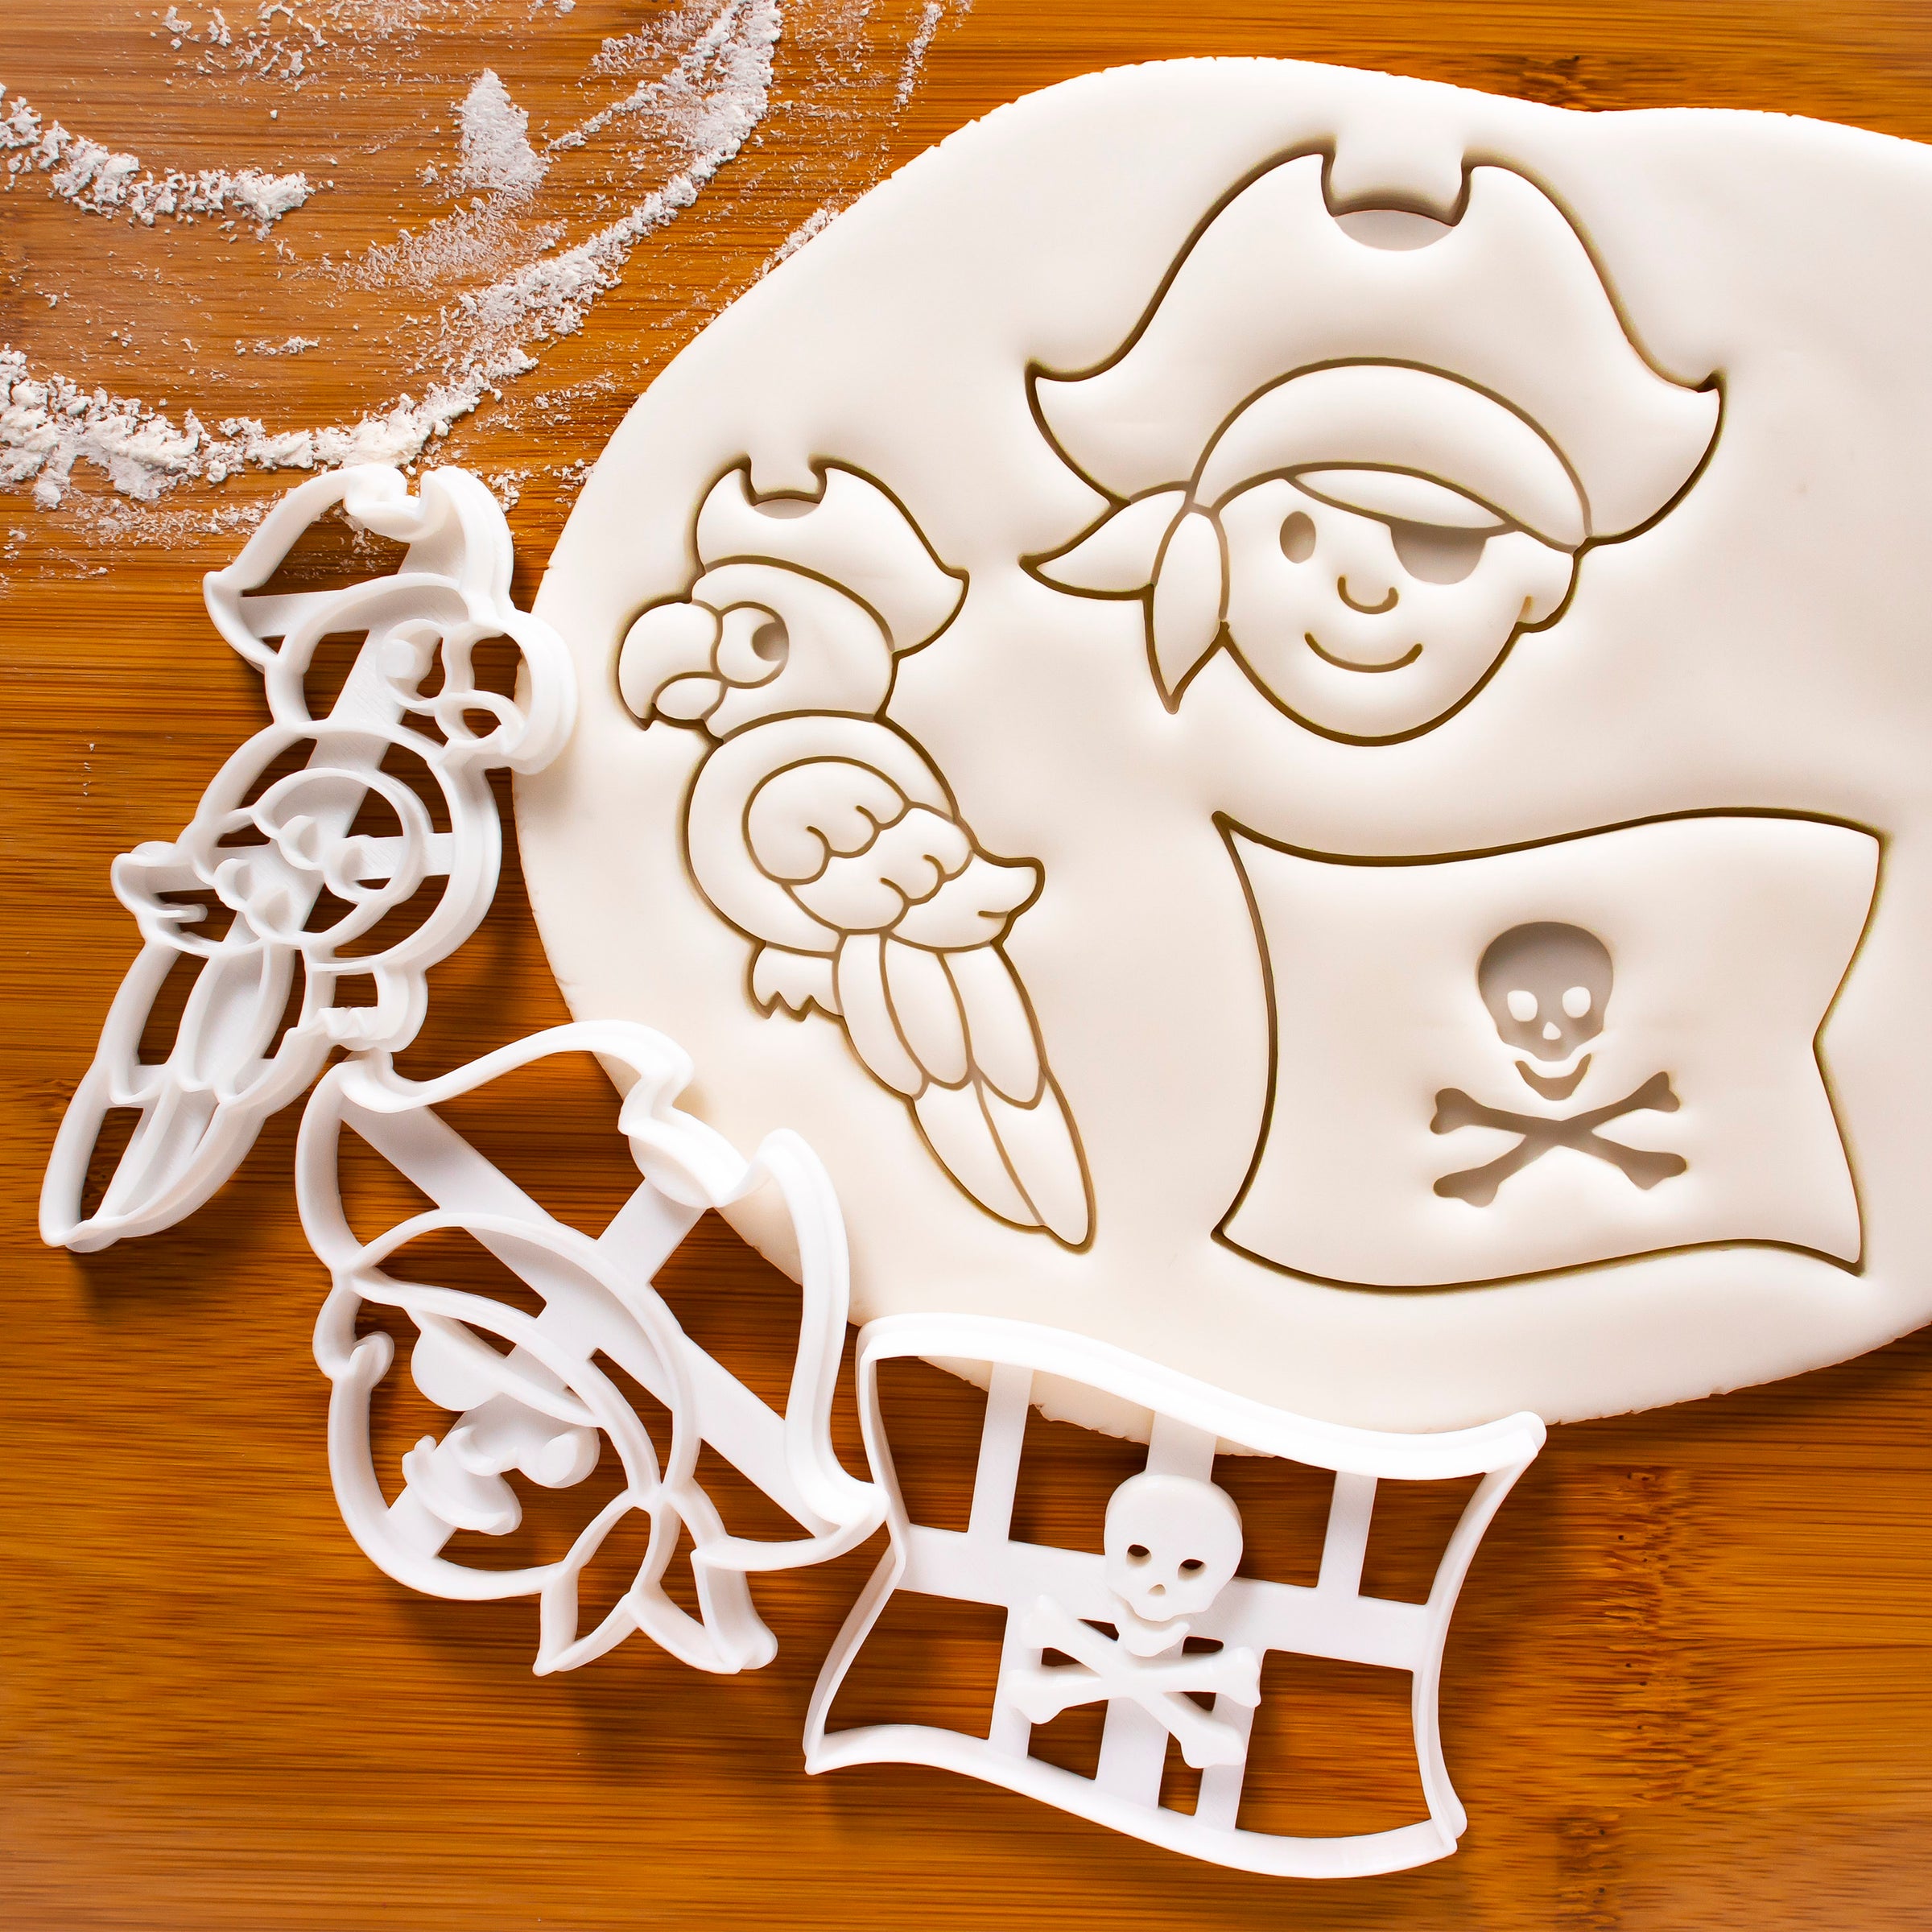 Set of 3 Cookie Cutters: Pirate Boy, Pirate Flag, Pirate Parrot